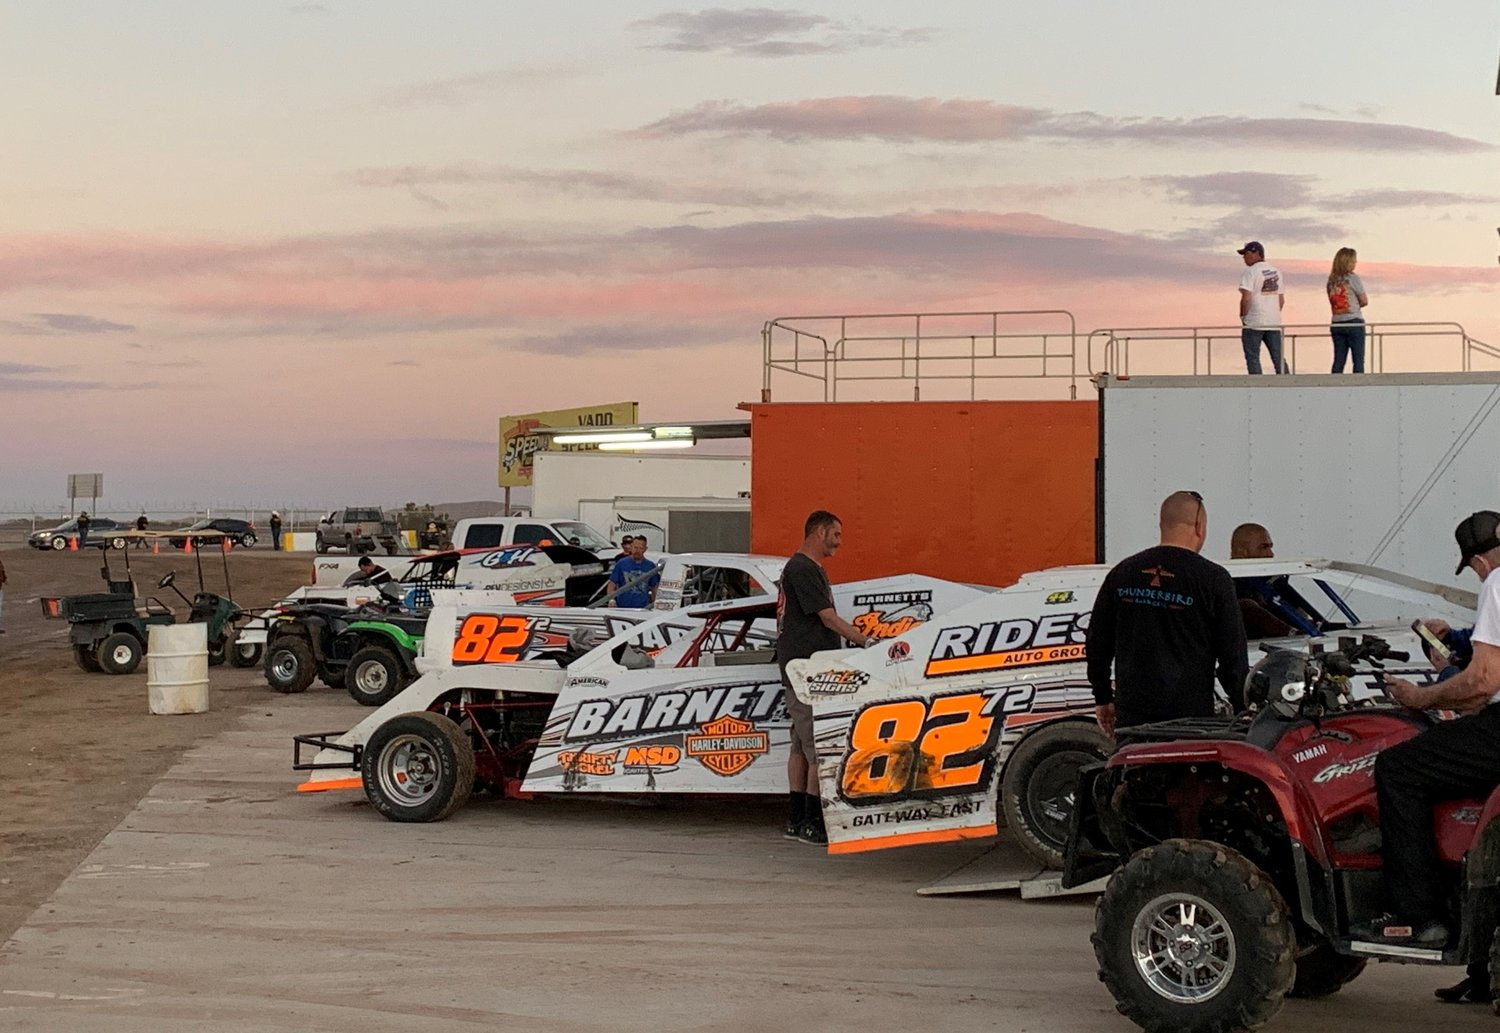 After 14 months of waiting, race car drivers and their teams were able to get their vehicles moving Saturday, March 20, as Vado Speedway Park opened its gates at 25 percent capacity. As long as Doña Ana County remains at the yellow level or better, there will be racing every weekend through the end of November.